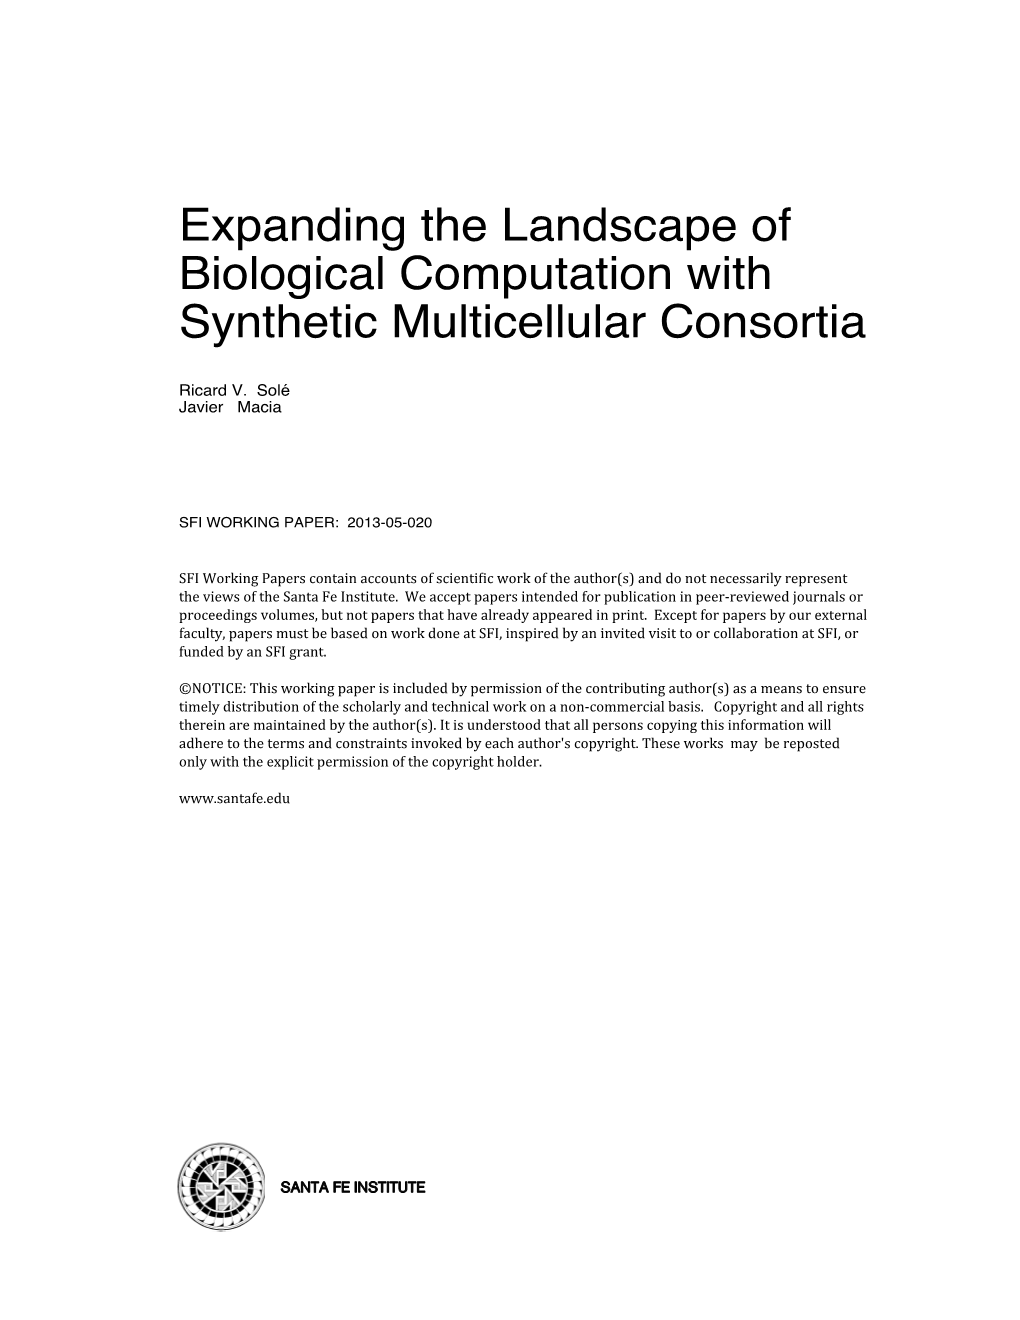 Expanding the Landscape of Biological Computation with Synthetic Multicellular Consortia